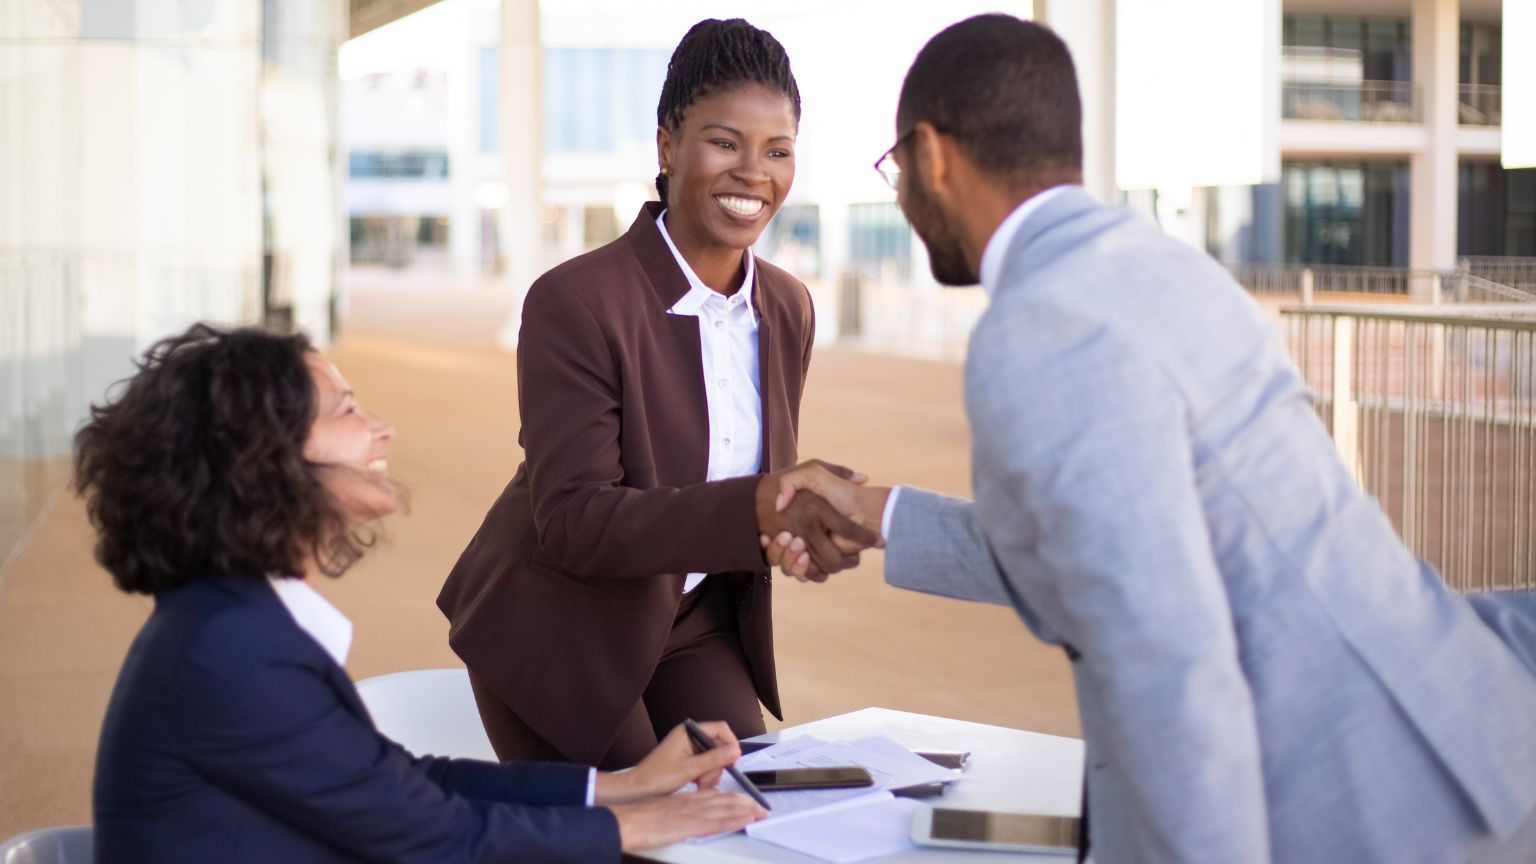 A woman and a man shaking hands in a corporate office